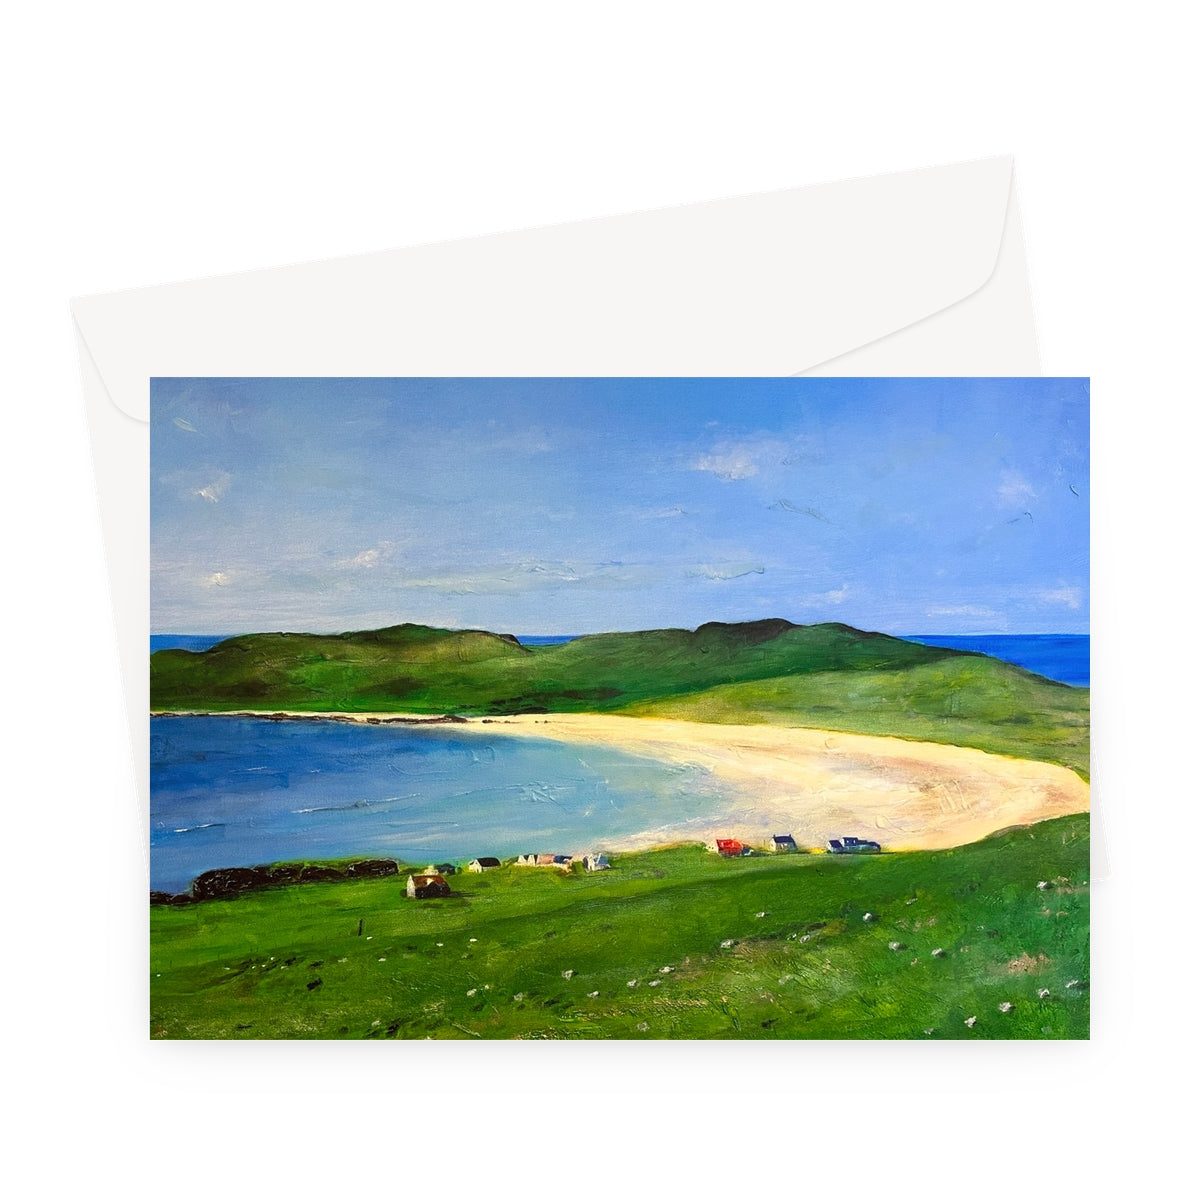 Balephuil Beach Tiree Art Gifts Greeting Card-Greetings Cards-Hebridean Islands Art Gallery-A5 Landscape-10 Cards-Paintings, Prints, Homeware, Art Gifts From Scotland By Scottish Artist Kevin Hunter